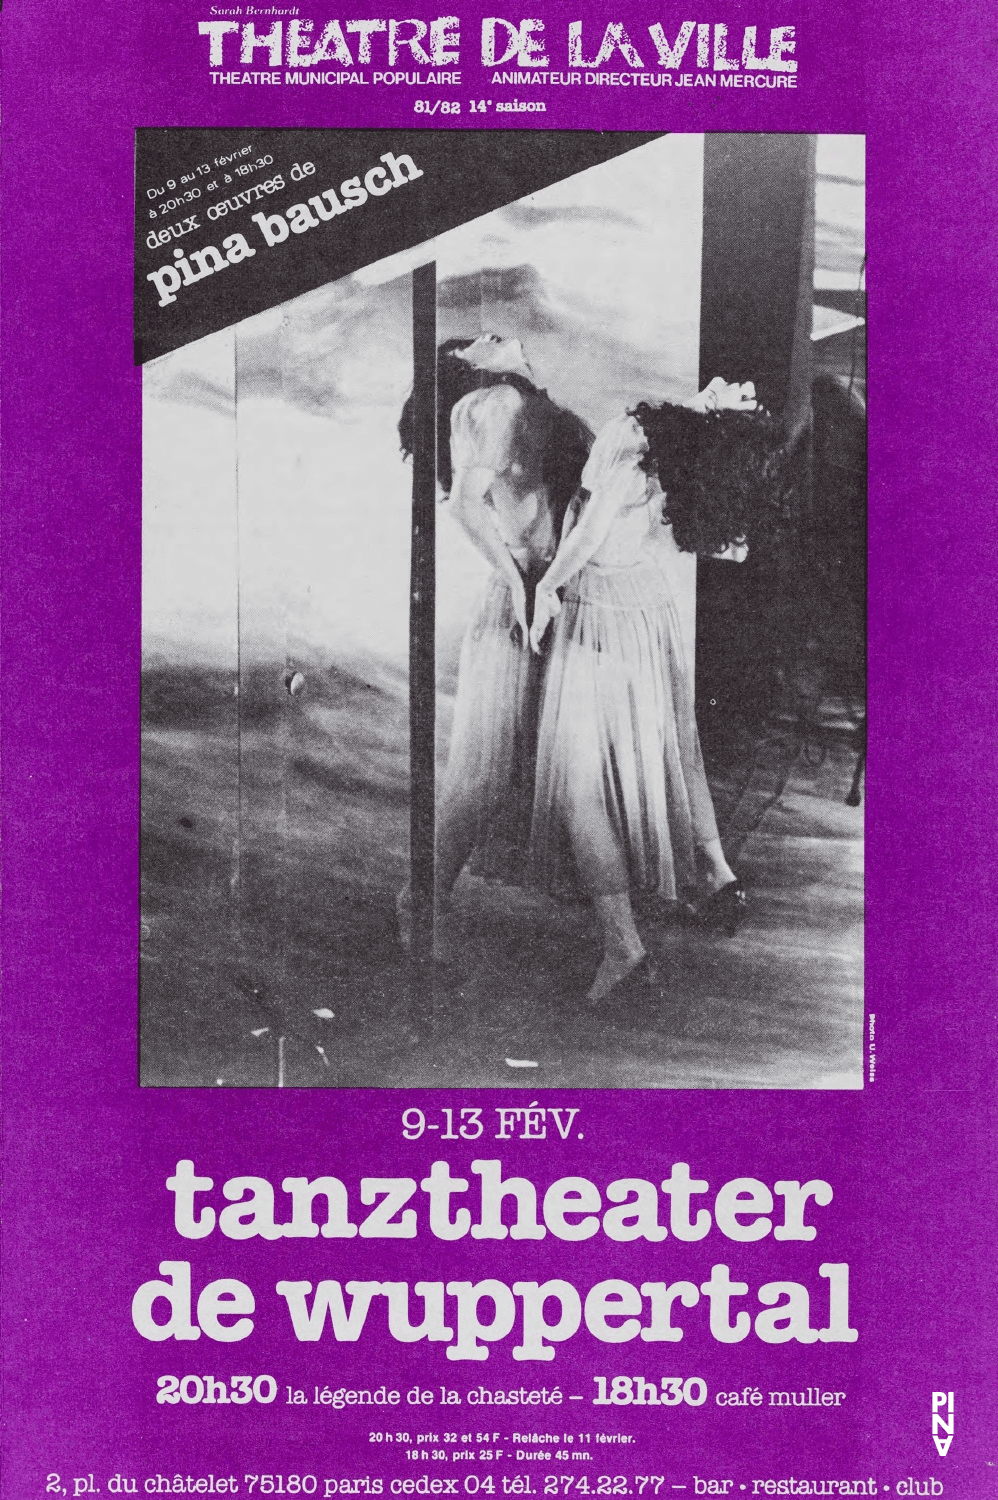 Booklet for “Café Müller” and “Keuschheitslegende (Legend of Chastity)” by Pina Bausch with Tanztheater Wuppertal in in Paris, 02/09/1982 – 02/13/1982